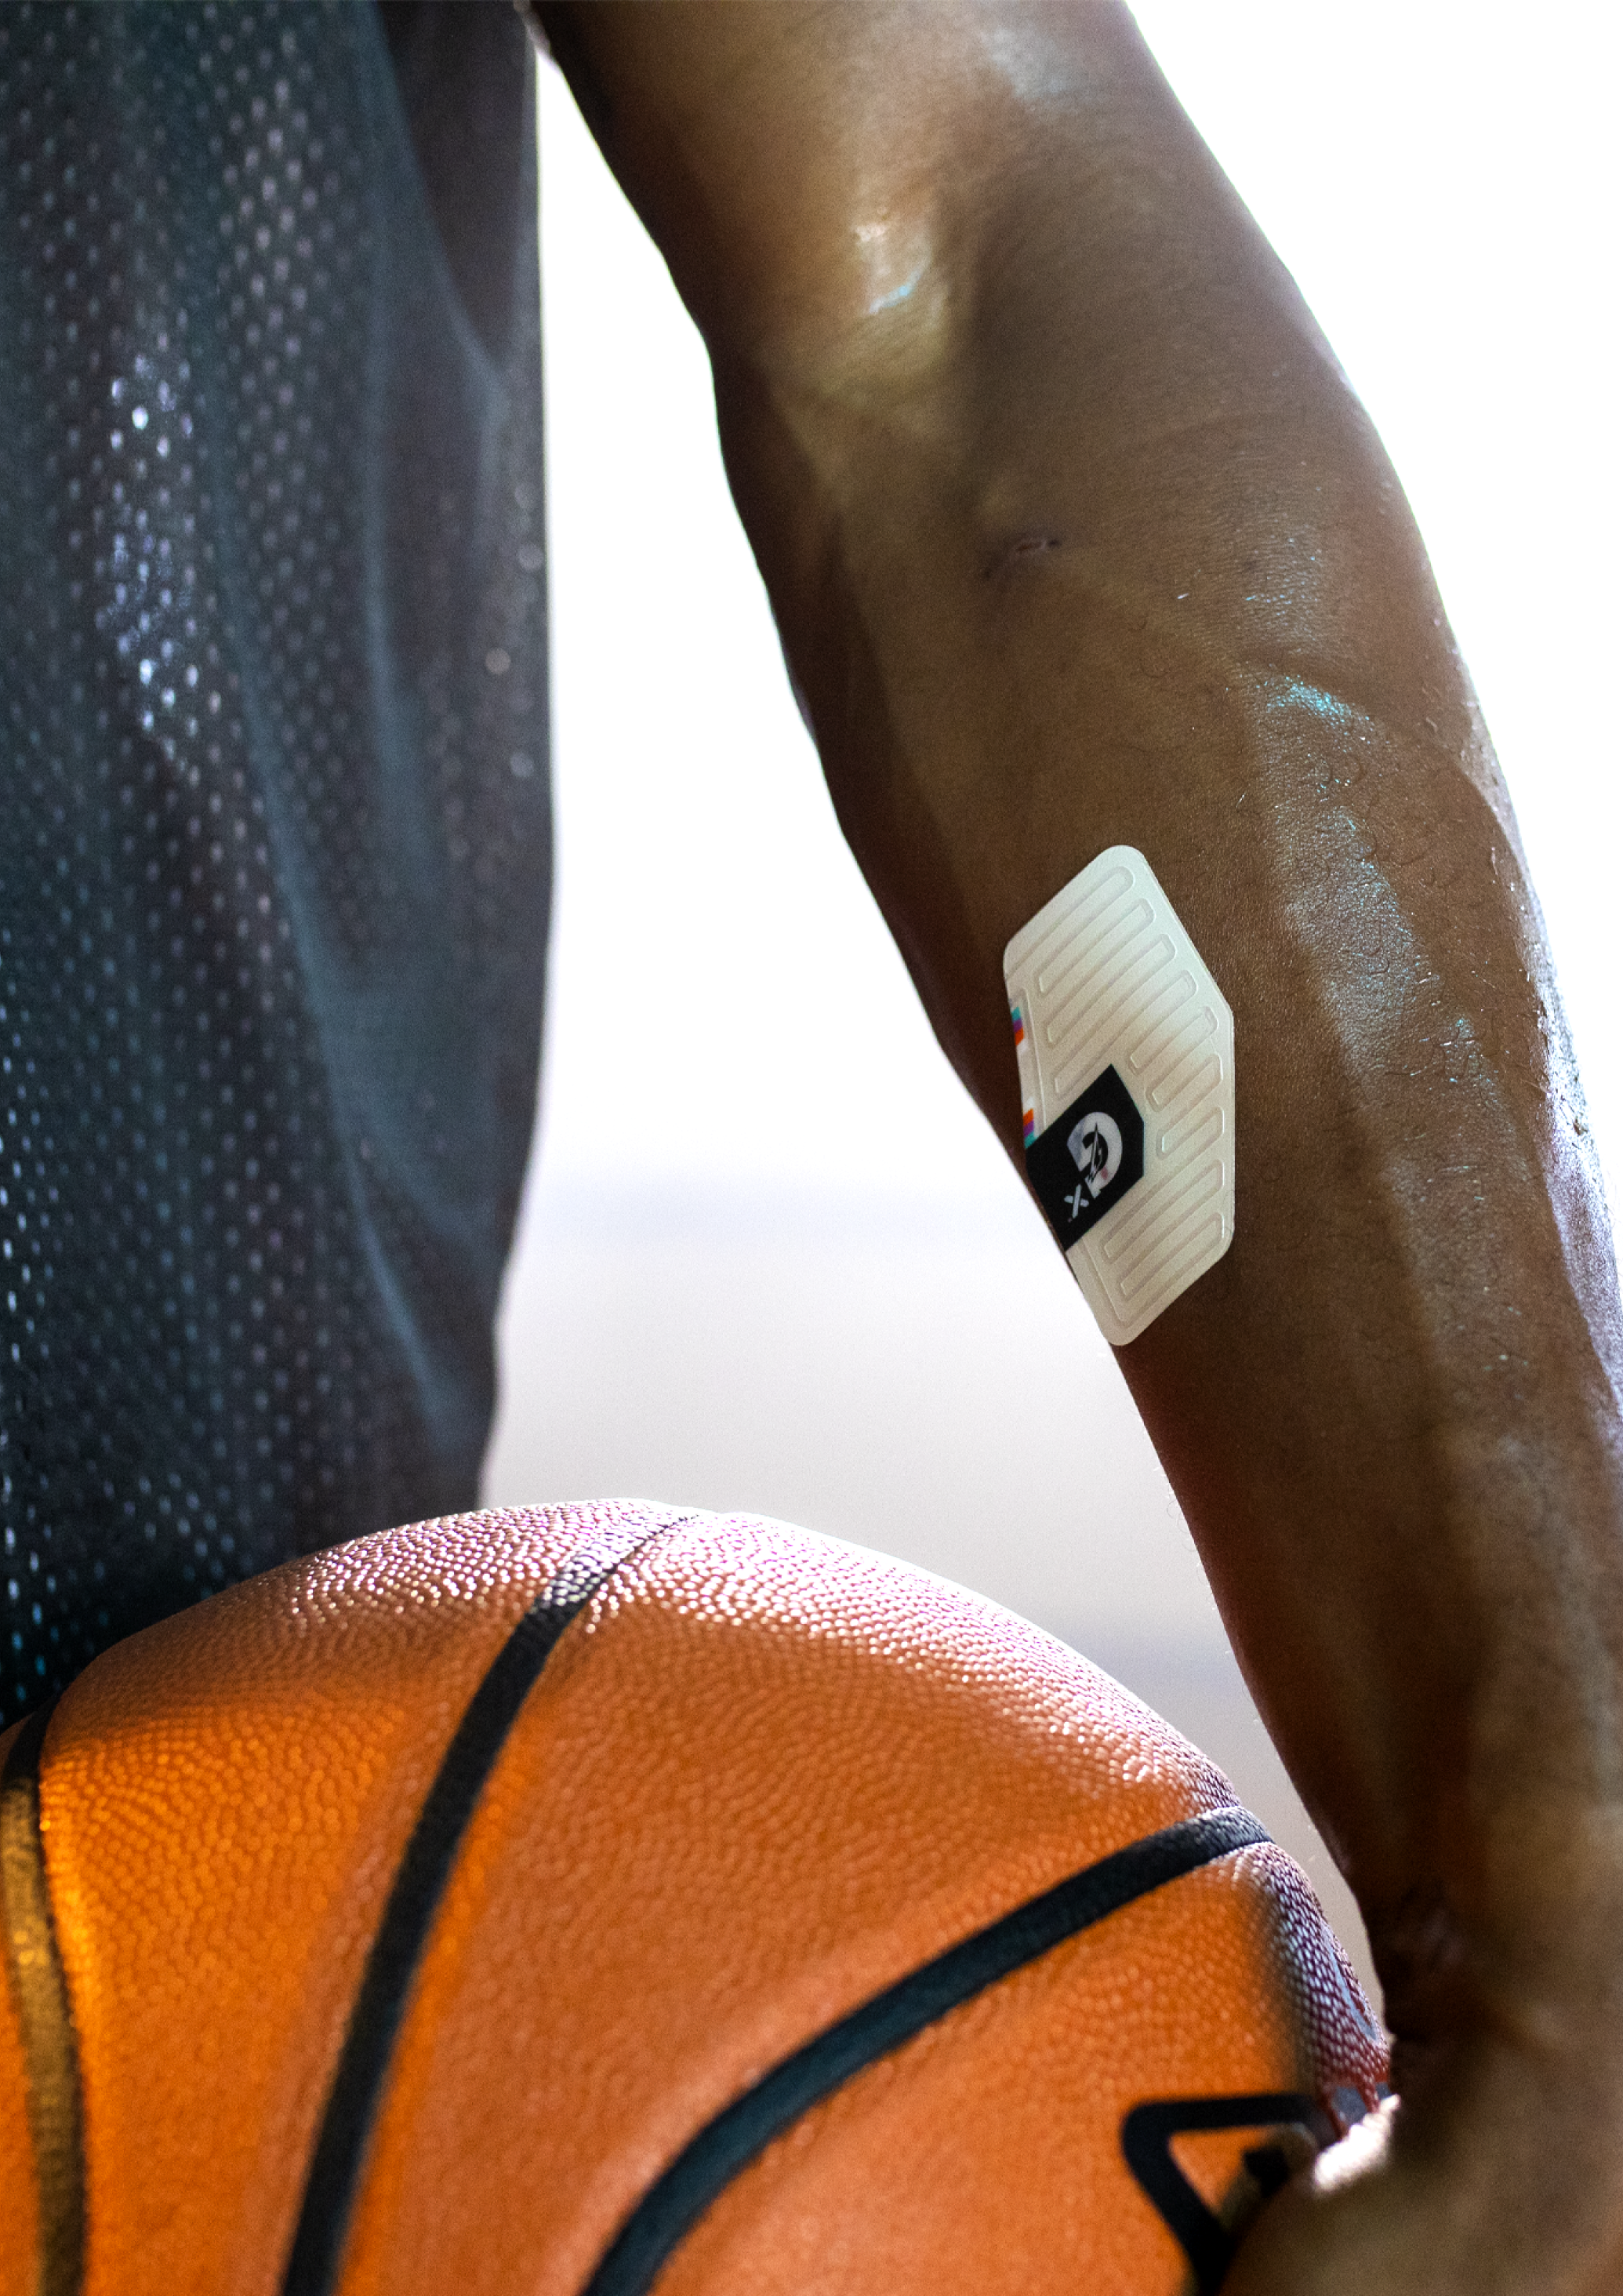 Athlete wearing sweat patch with basketball